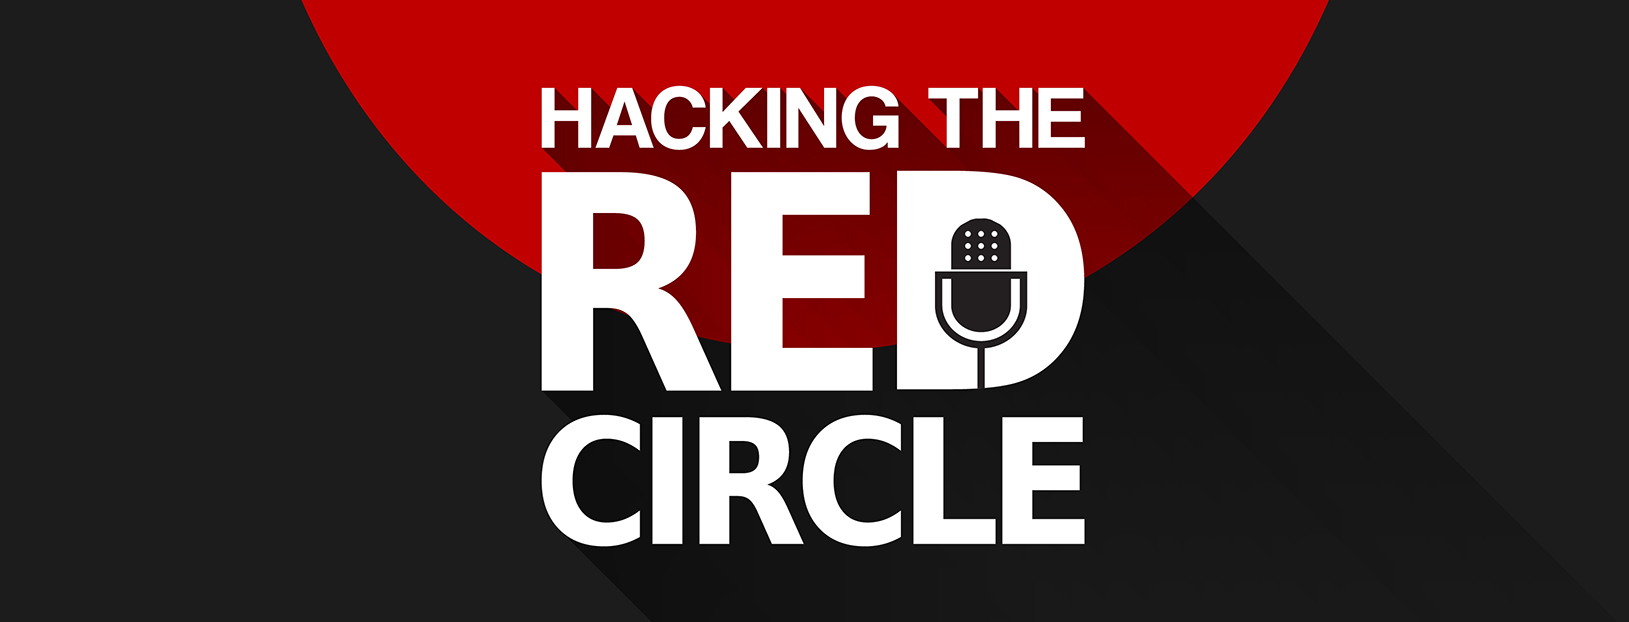 Hacking the Red Circle